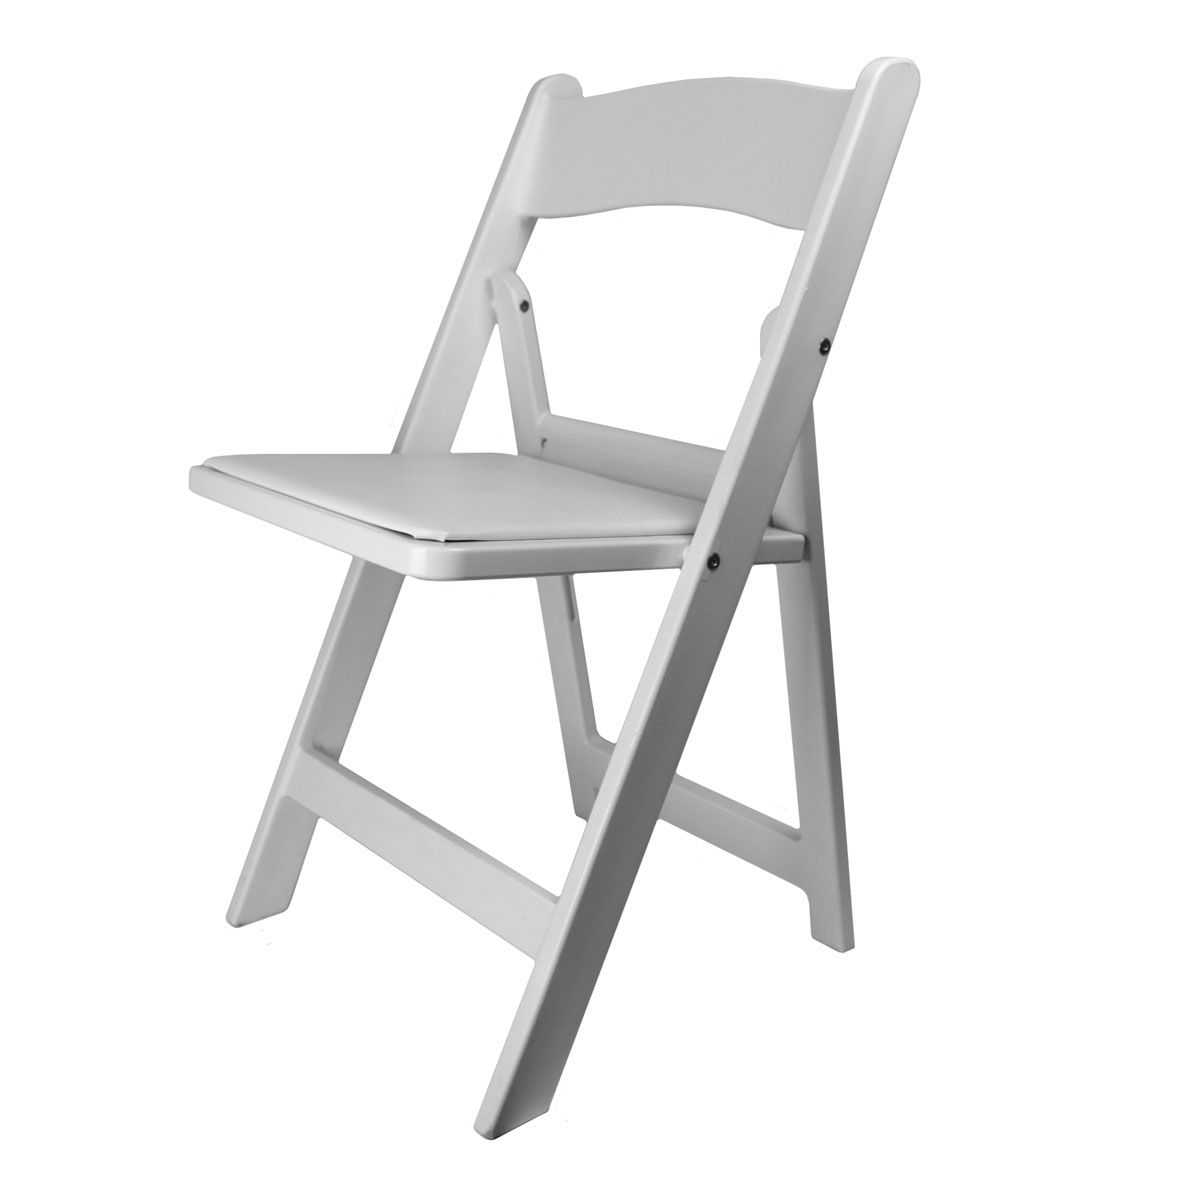 Chair White Garden With Padded Seat